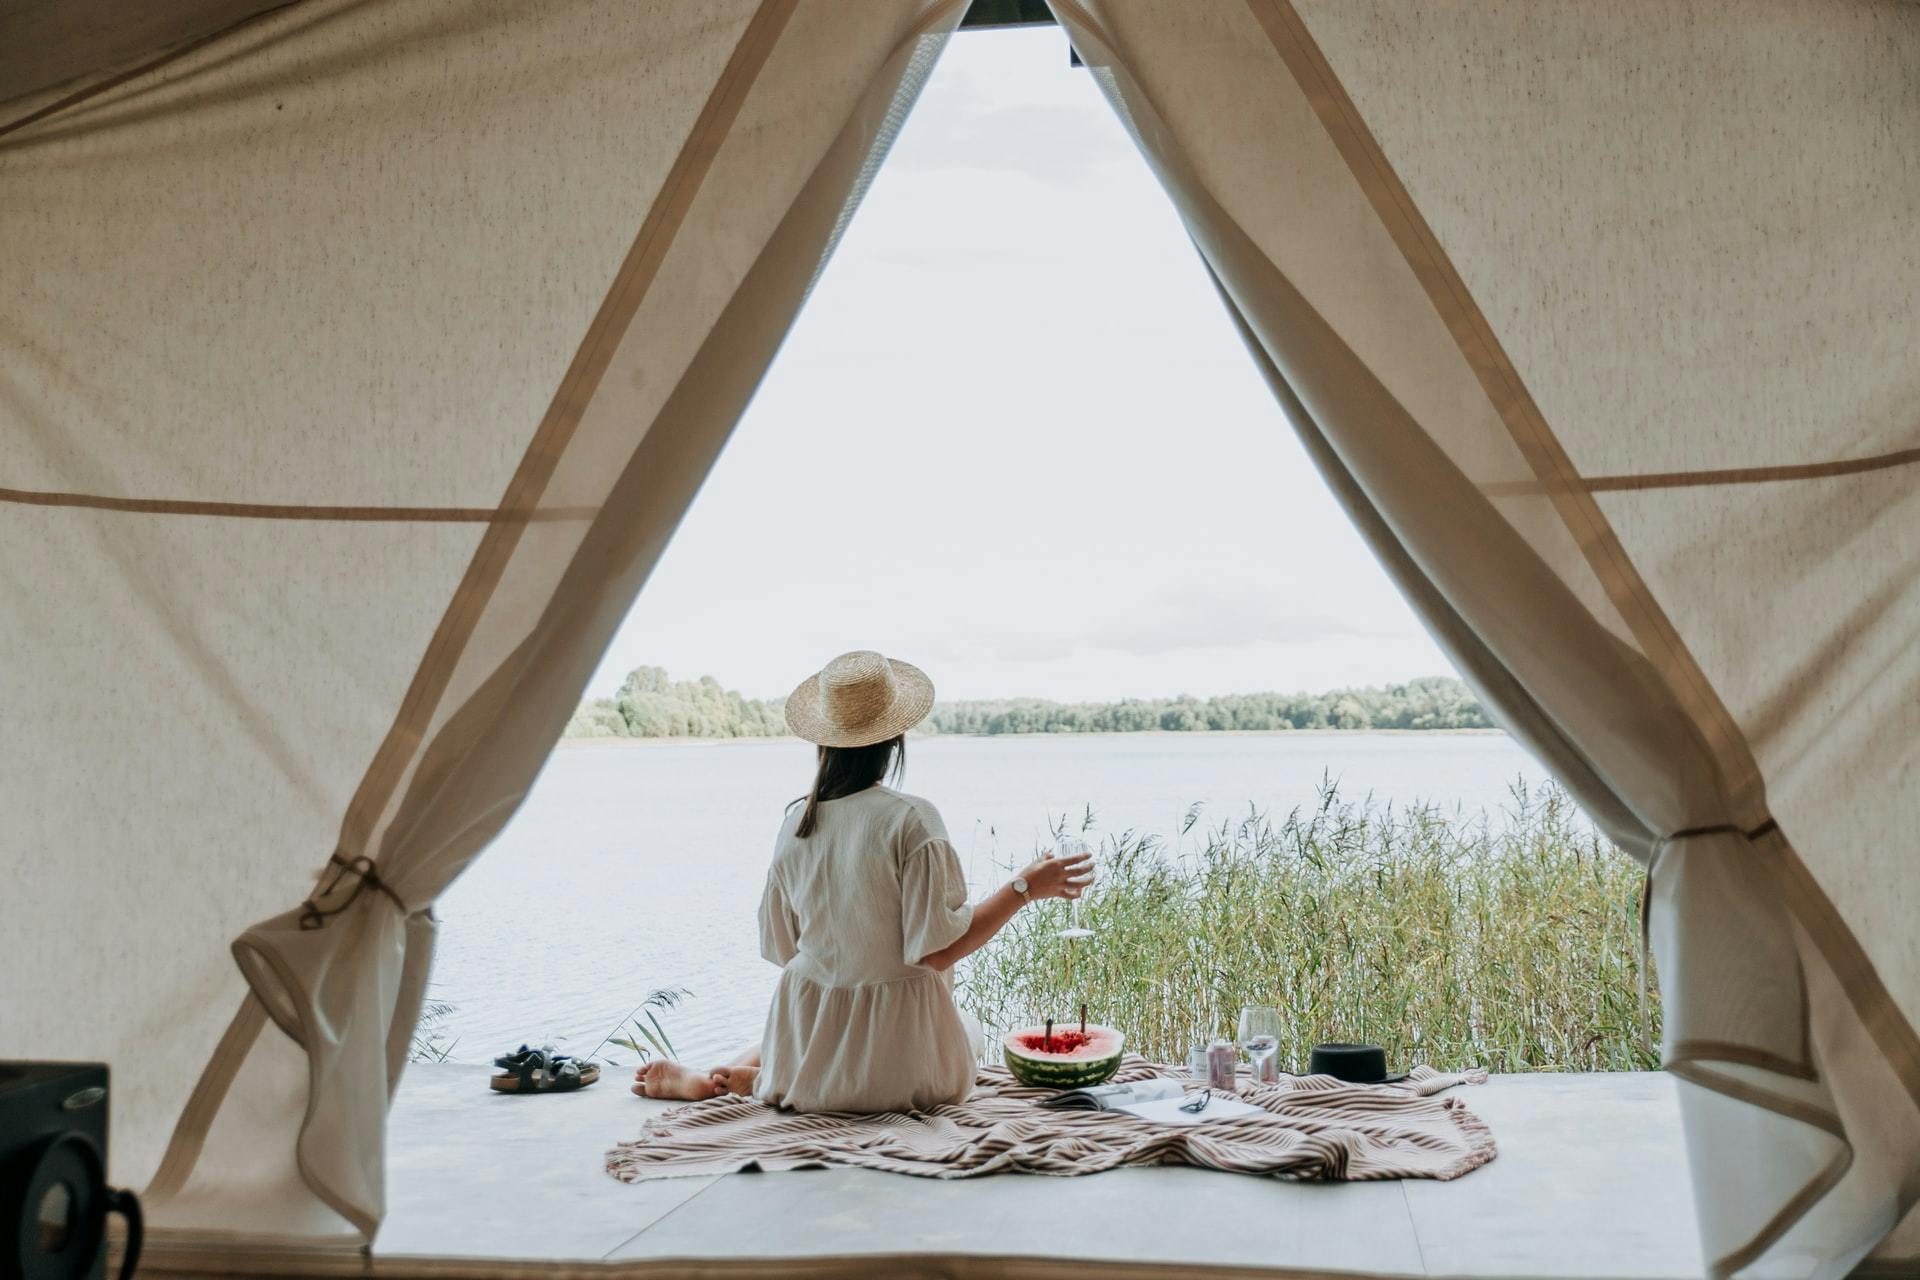 Woman in a hat drinking something and eating some food outside of a tent.